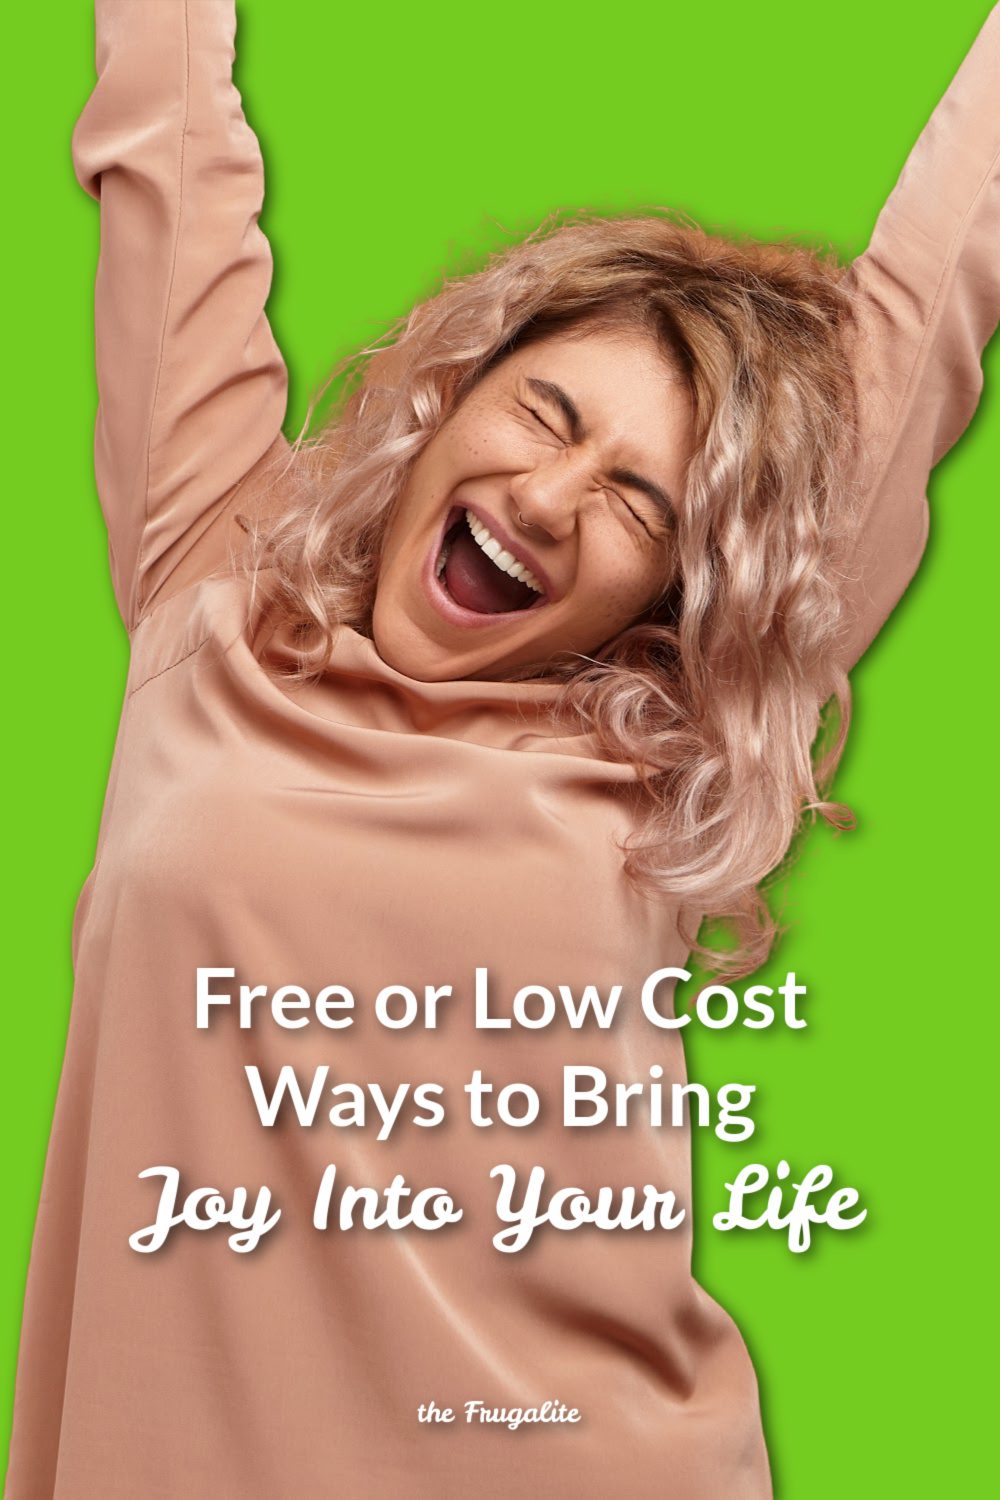 Free or Low Cost Ways to Bring Joy into your Life